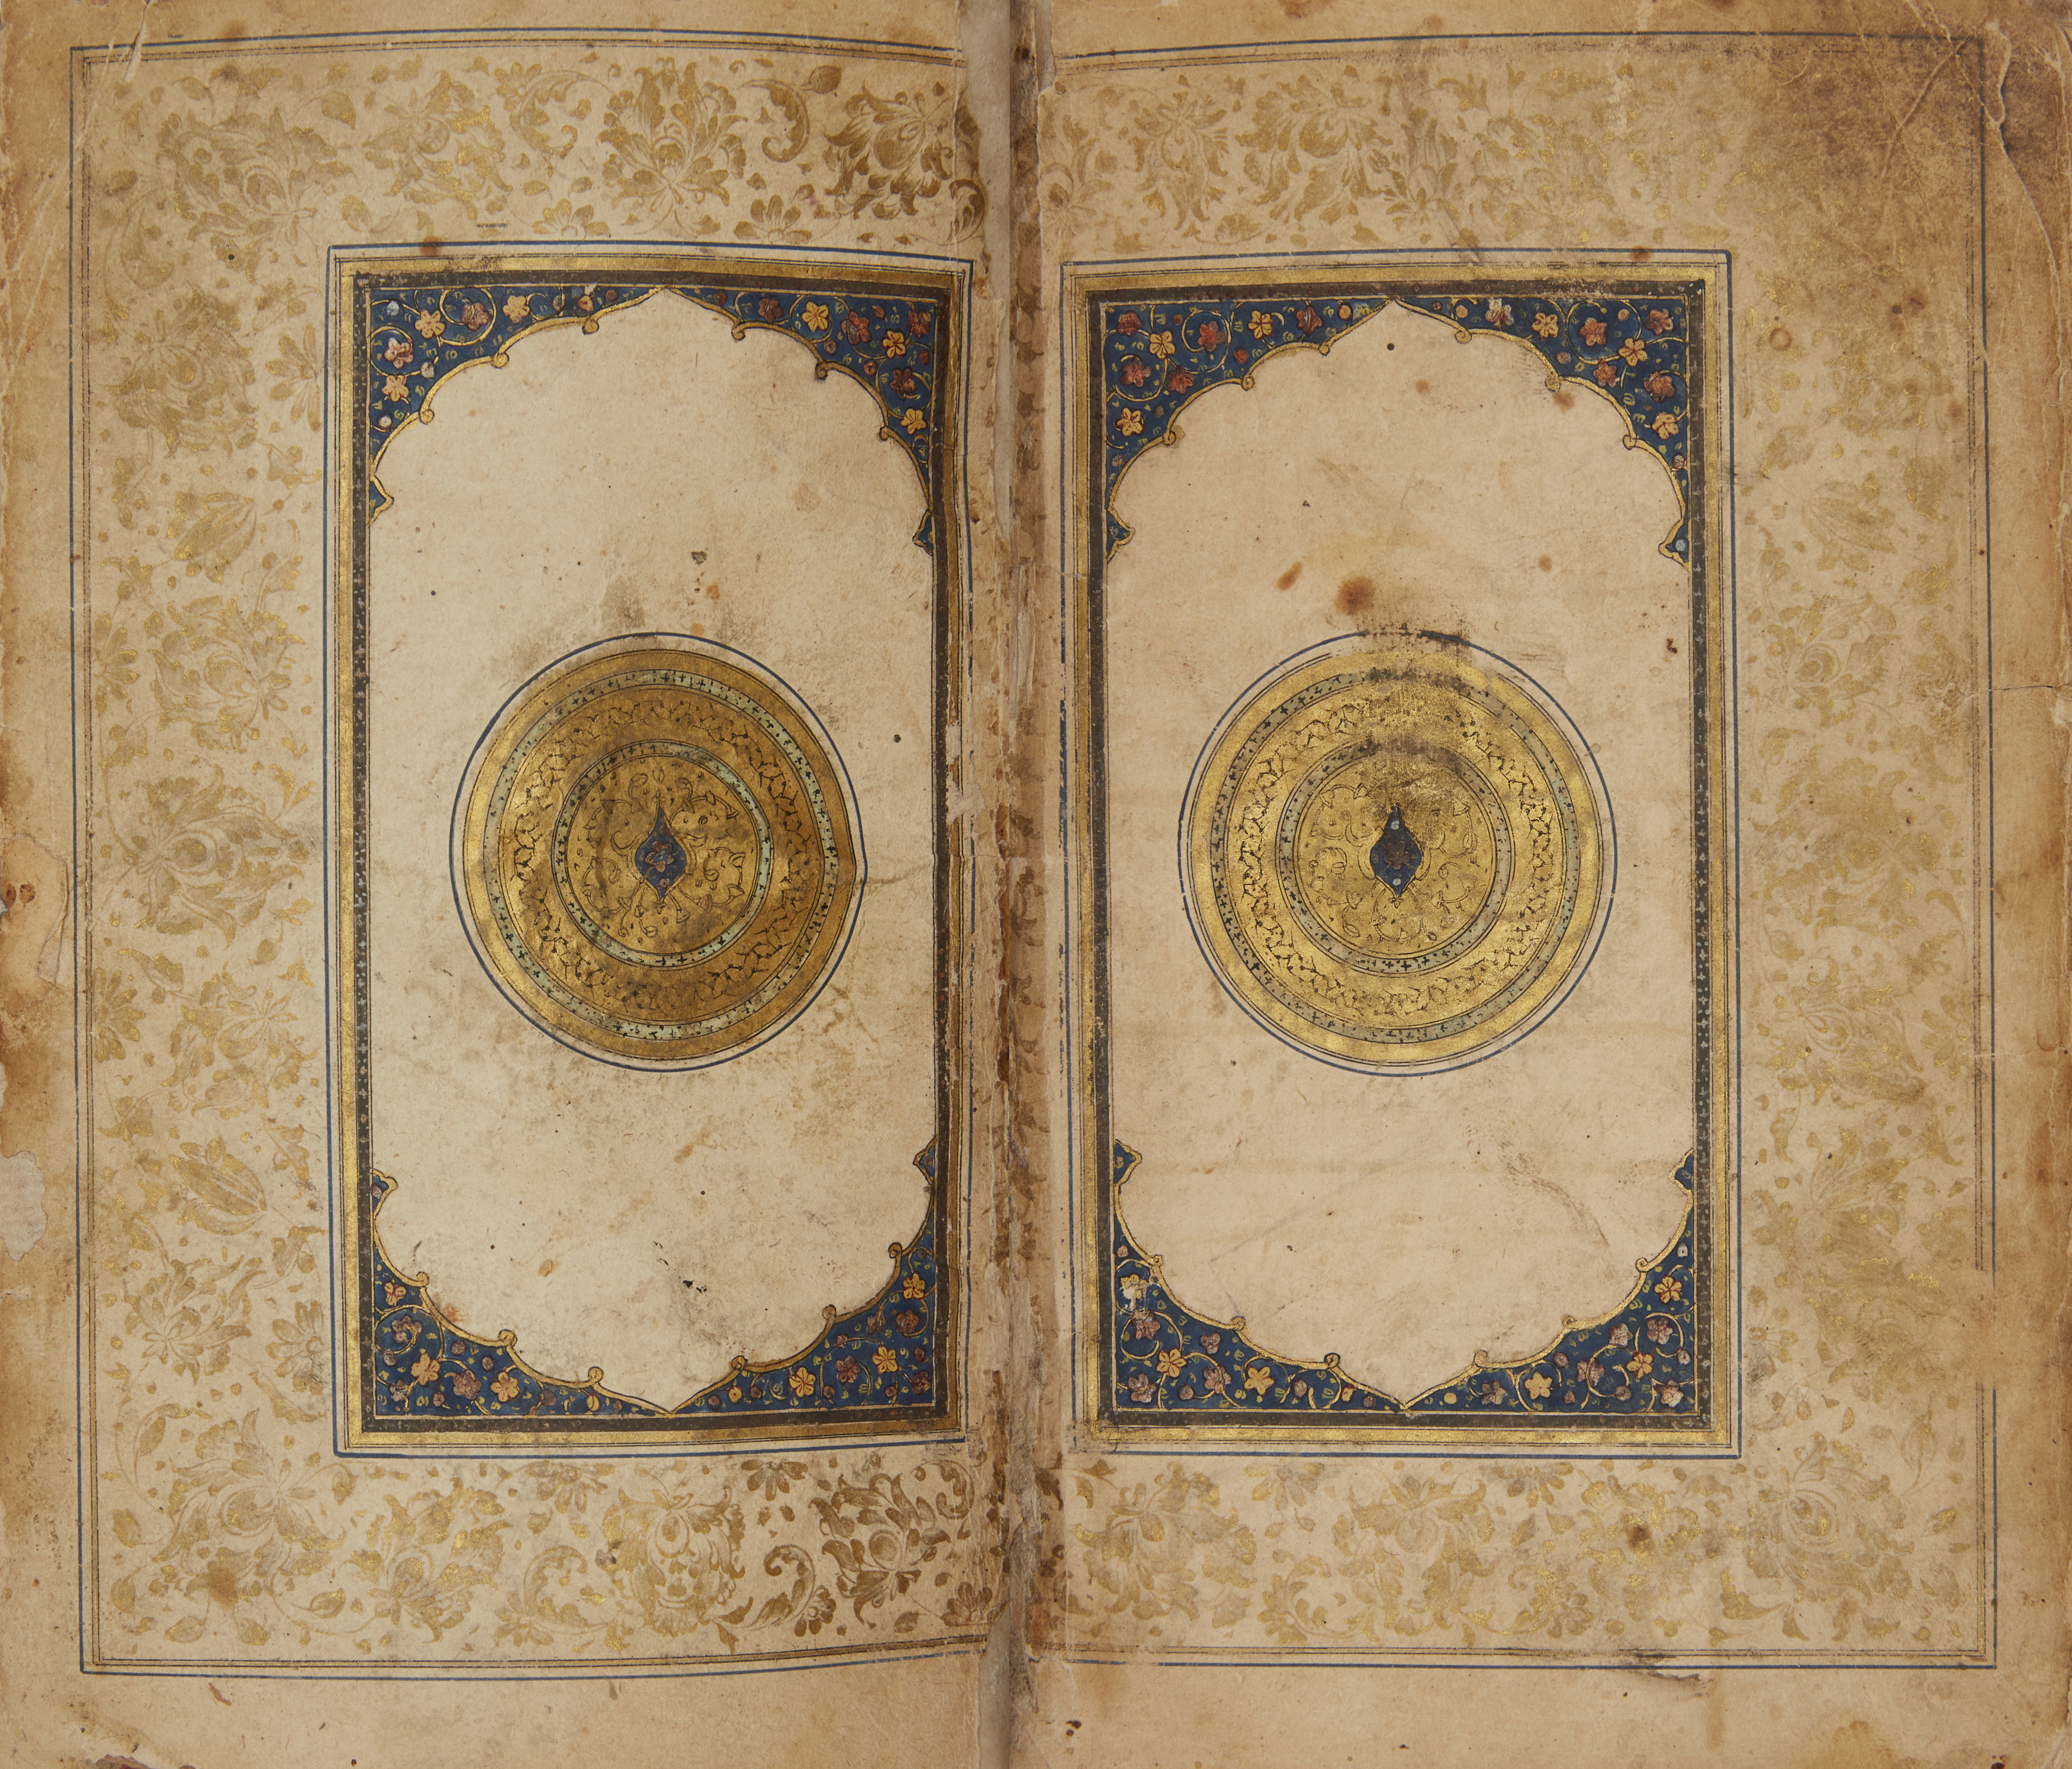 Property from an Important Private Collection Kitab fadail al-anam, Safavid Iran, 17th century ...